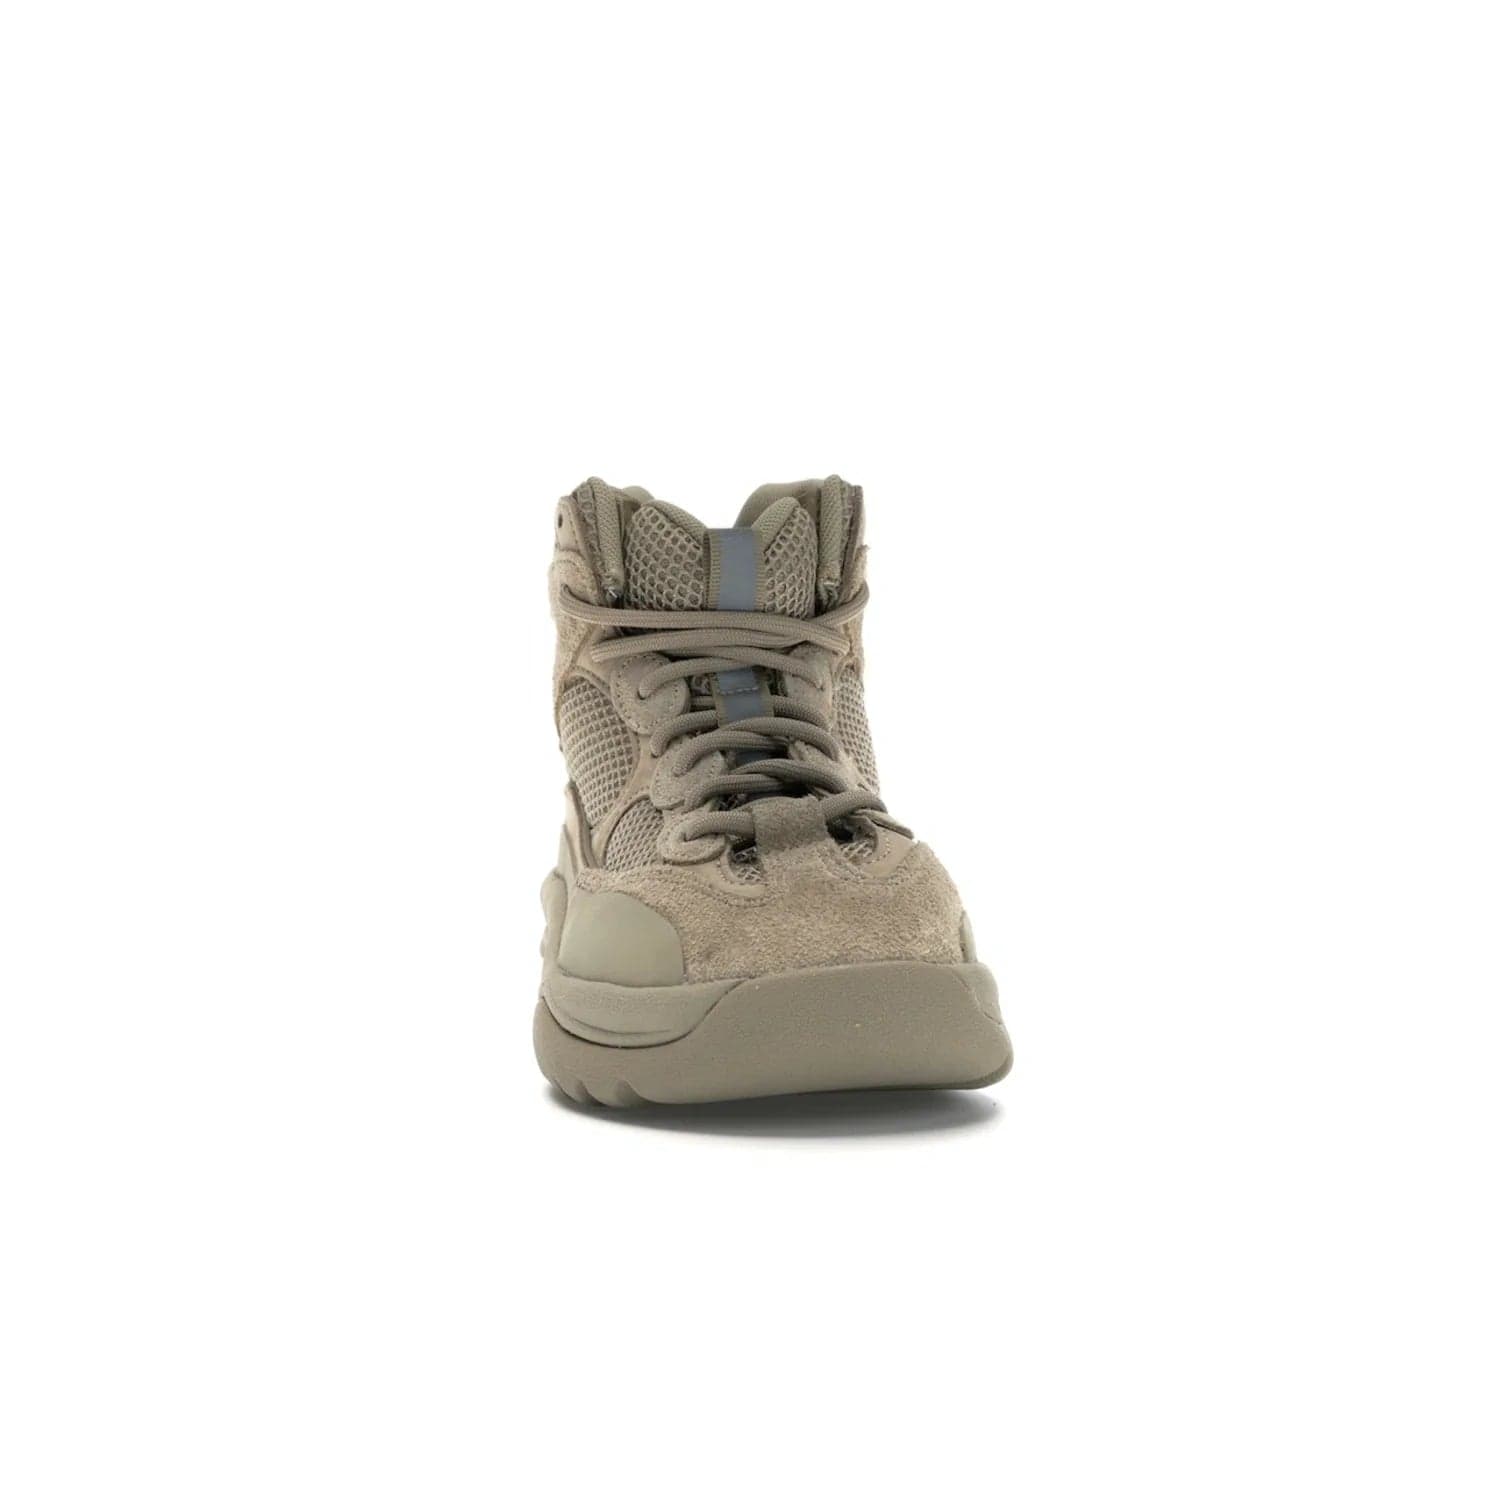 adidas Yeezy Desert Boot Rock - Image 9 - Only at www.BallersClubKickz.com - #
This season, make a fashion statement with the adidas Yeezy Desert Boot Rock. Nubuck and suede upper offers tonal style while the grooved sole provides traction and stability. Get yours in April 2019.